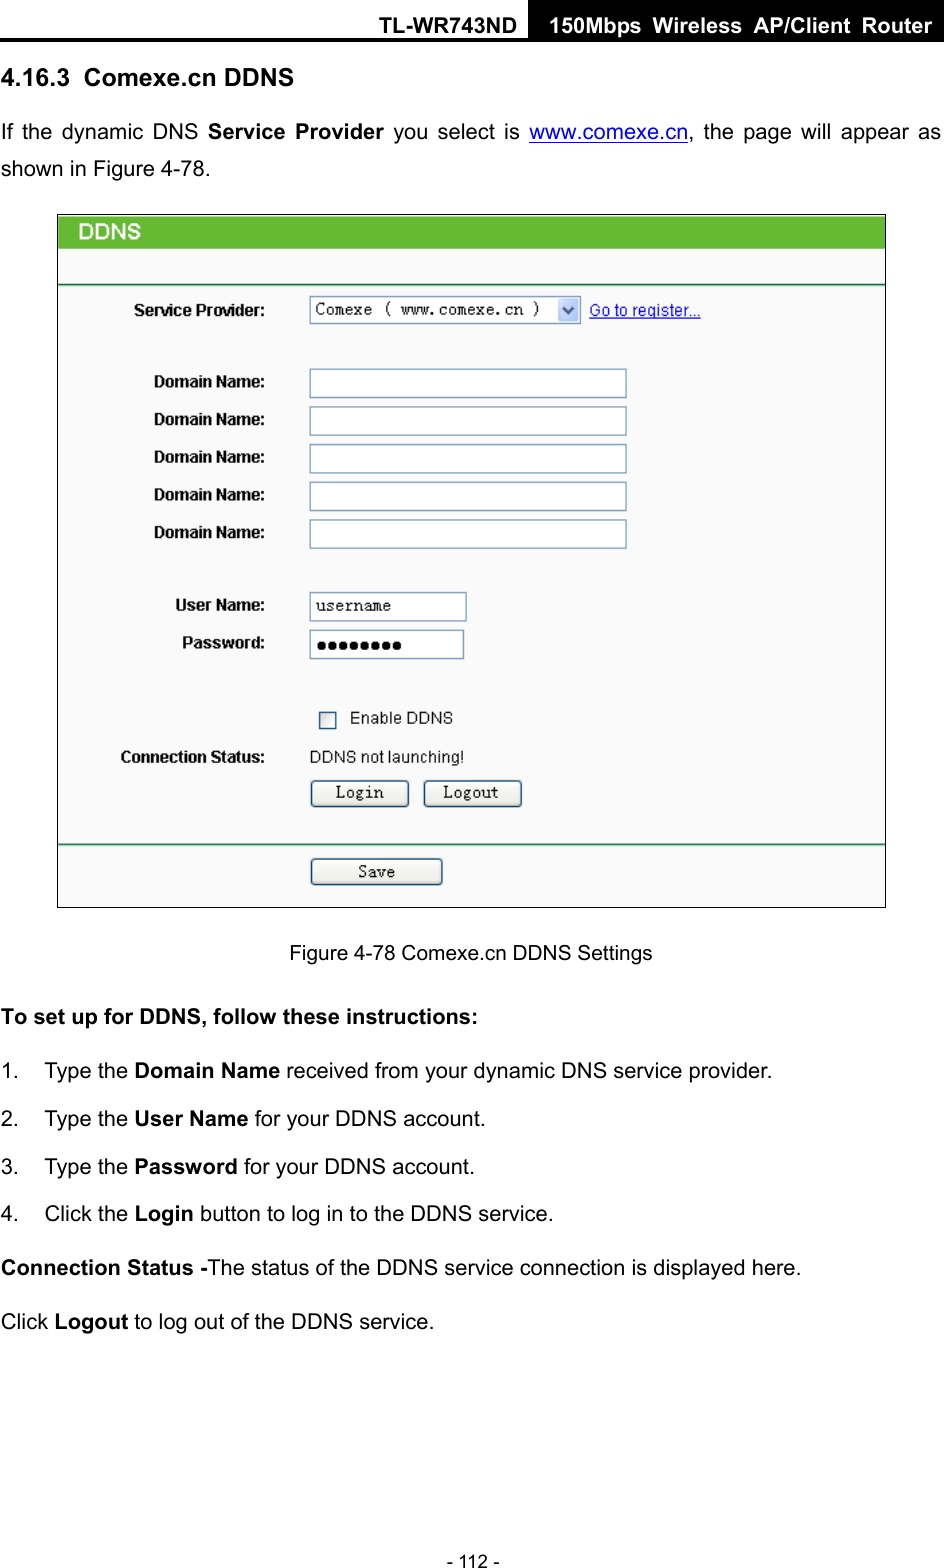 TL-WR743ND 150Mbps Wireless AP/Client Router - 112 - 4.16.3  Comexe.cn DDNS If the dynamic DNS Service Provider you select is www.comexe.cn, the page will appear as shown in Figure 4-78.  Figure 4-78 Comexe.cn DDNS Settings To set up for DDNS, follow these instructions: 1. Type the Domain Name received from your dynamic DNS service provider.     2. Type the User Name for your DDNS account.   3. Type the Password for your DDNS account.   4. Click the Login button to log in to the DDNS service. Connection Status -The status of the DDNS service connection is displayed here. Click Logout to log out of the DDNS service.   